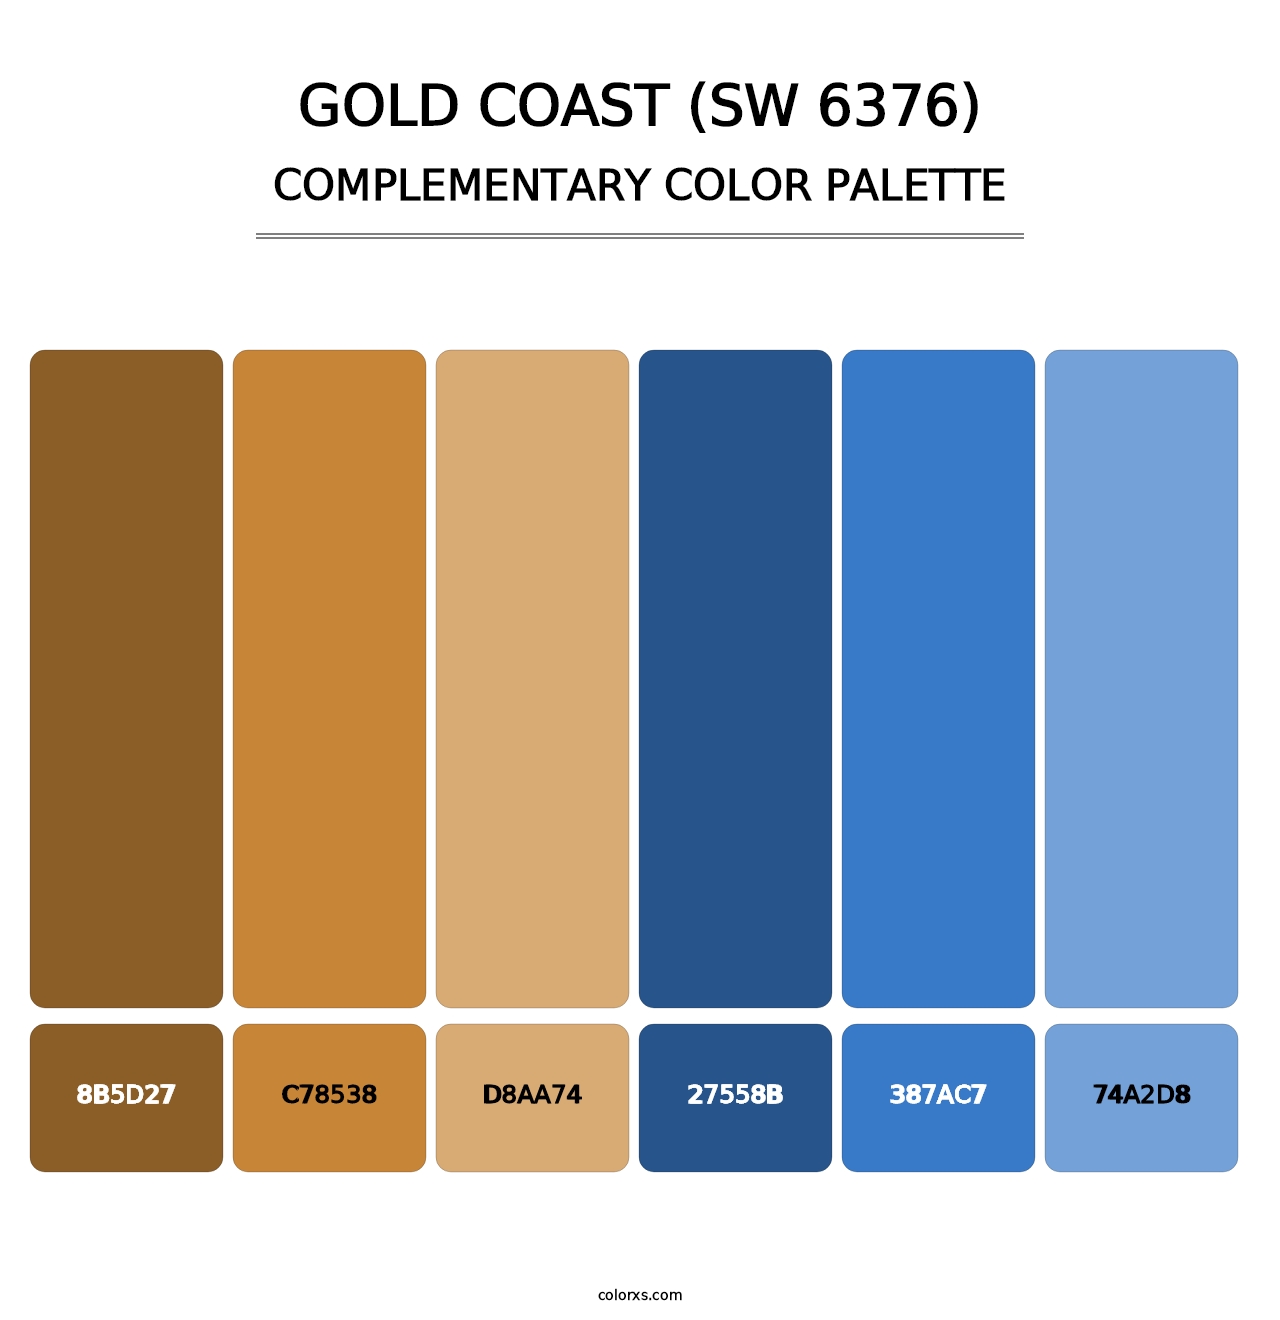 Gold Coast (SW 6376) - Complementary Color Palette